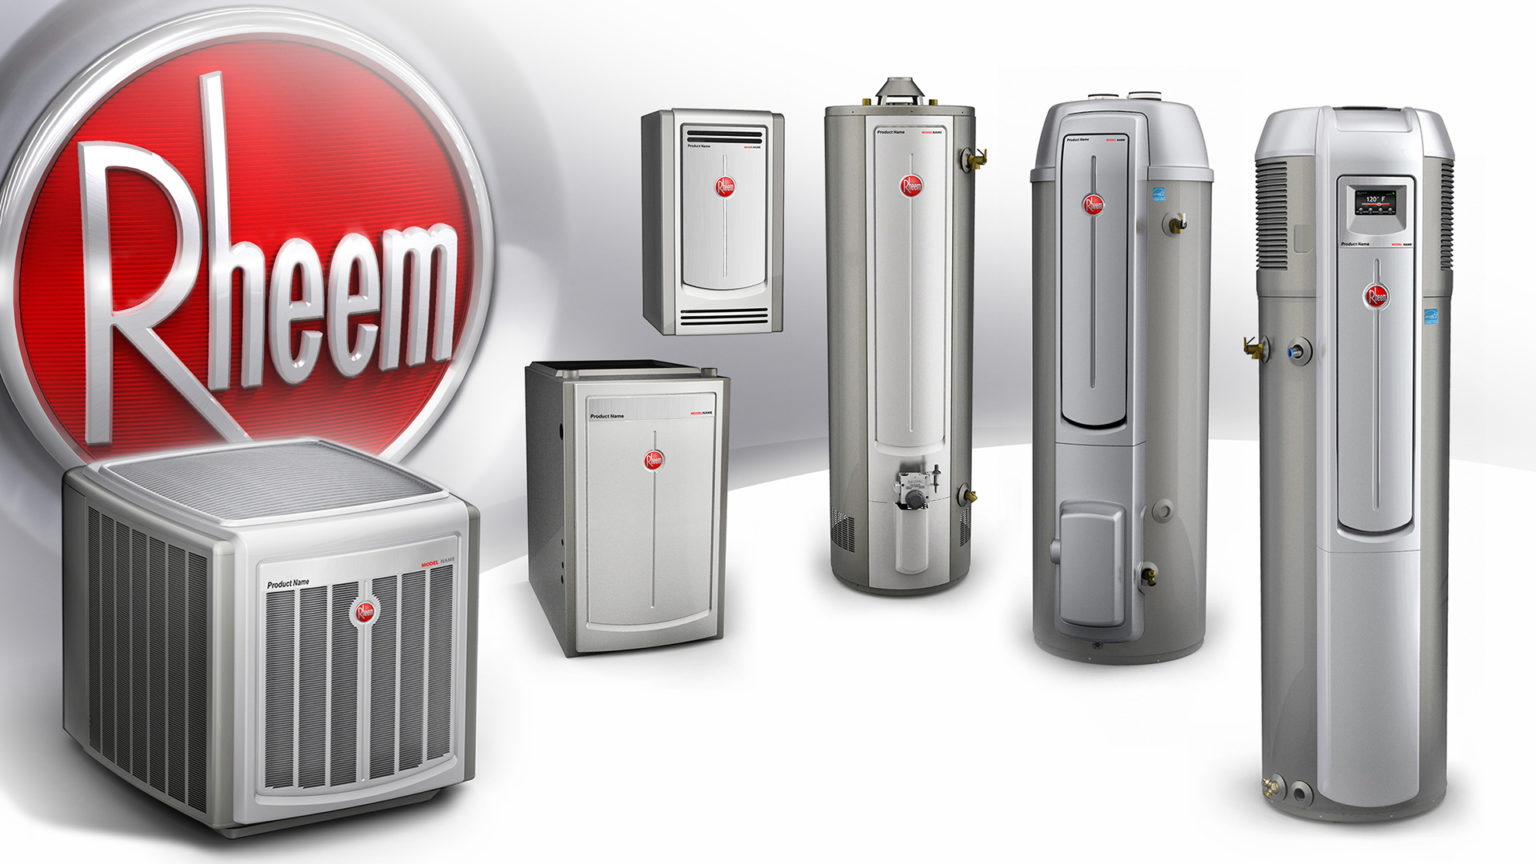 3-rheem-40-gallon-gas-water-heater-review-on-the-market-heaters-for